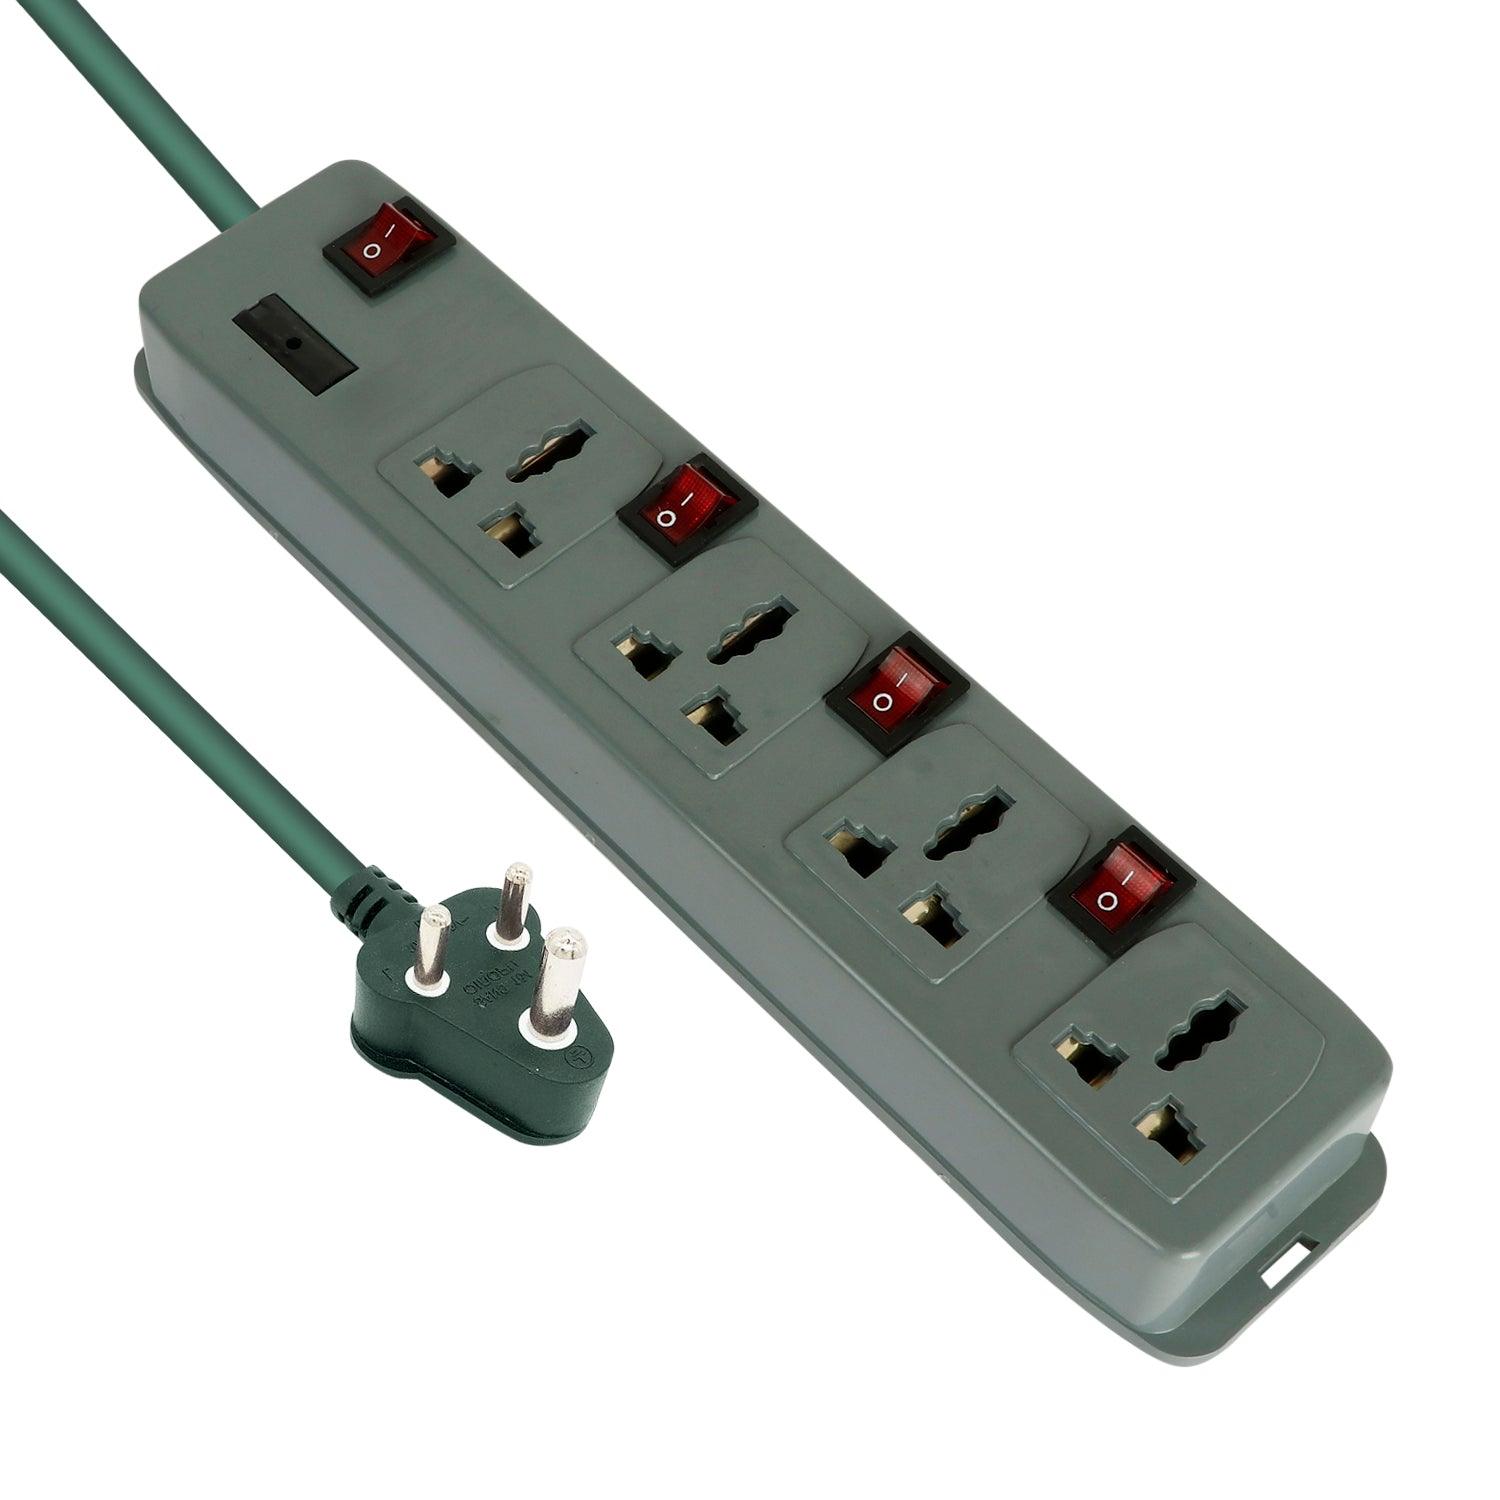 FEDUS Switch Board Extension Cords with Long Wire for Computer, Surge Protectors Spike Buster - FEDUS